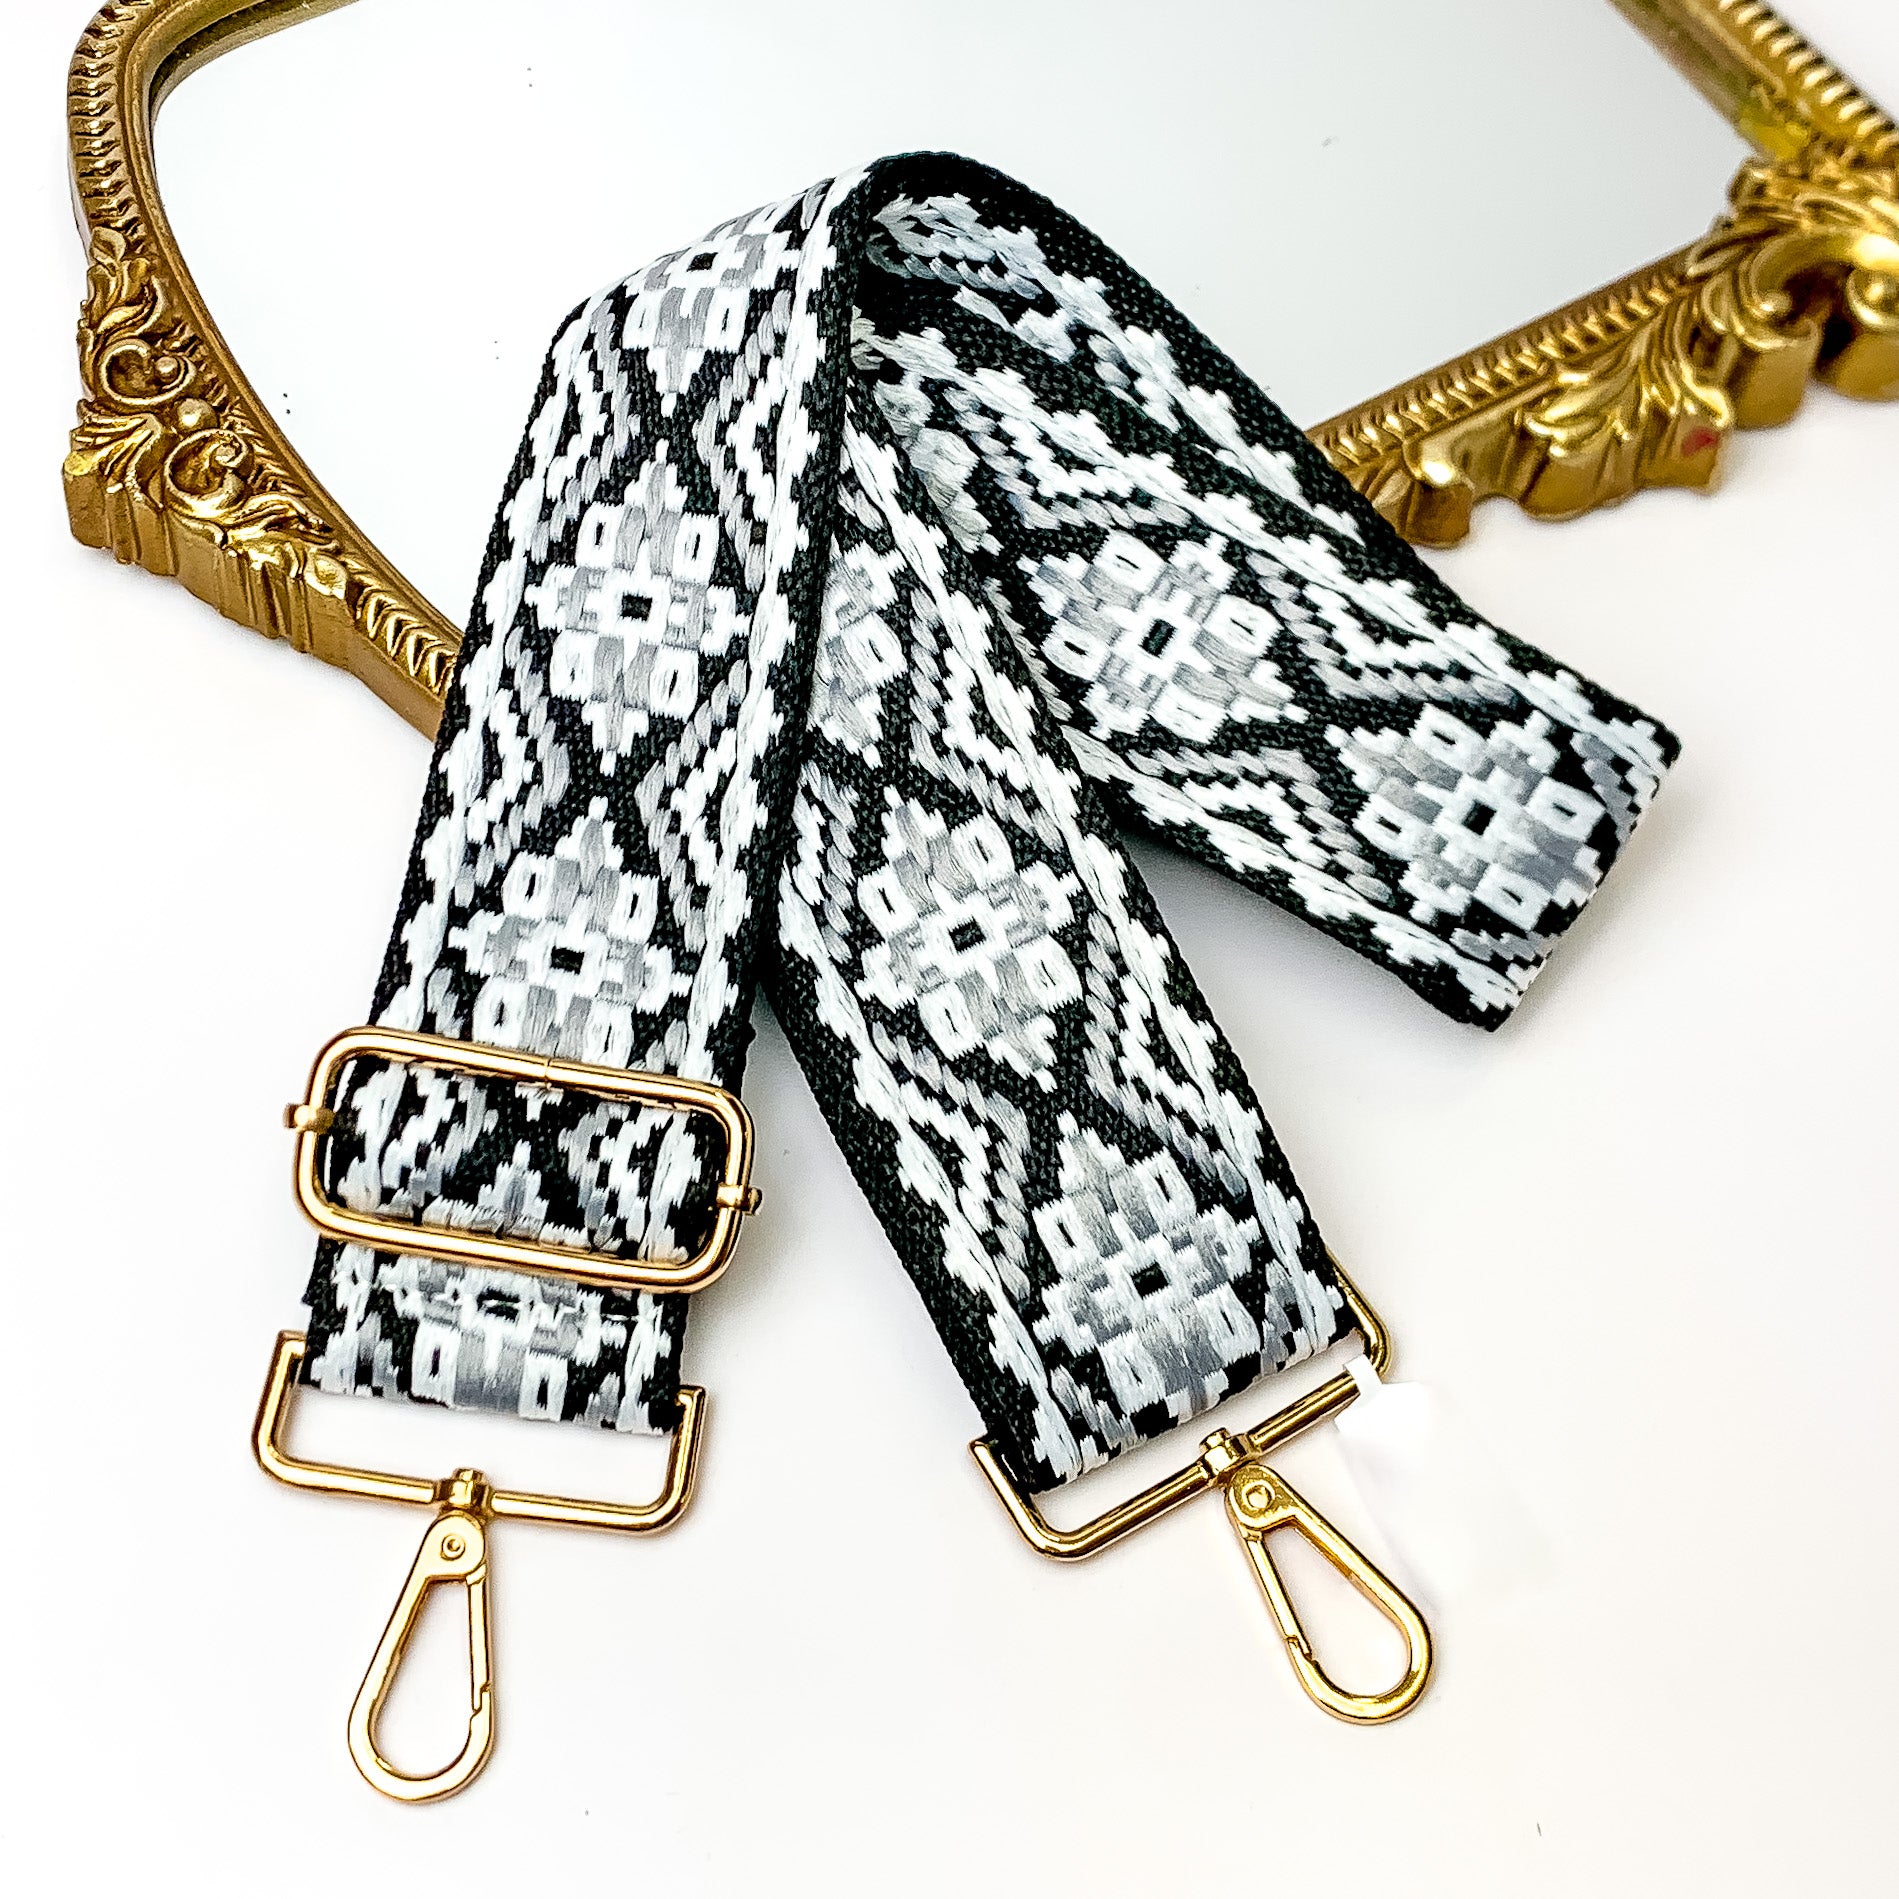 Black canvas purse strap with black and white embroidered aztec design. This purse strap includes gold accents. This purse strap is pictured partially laying on a gold mirror on a white background.